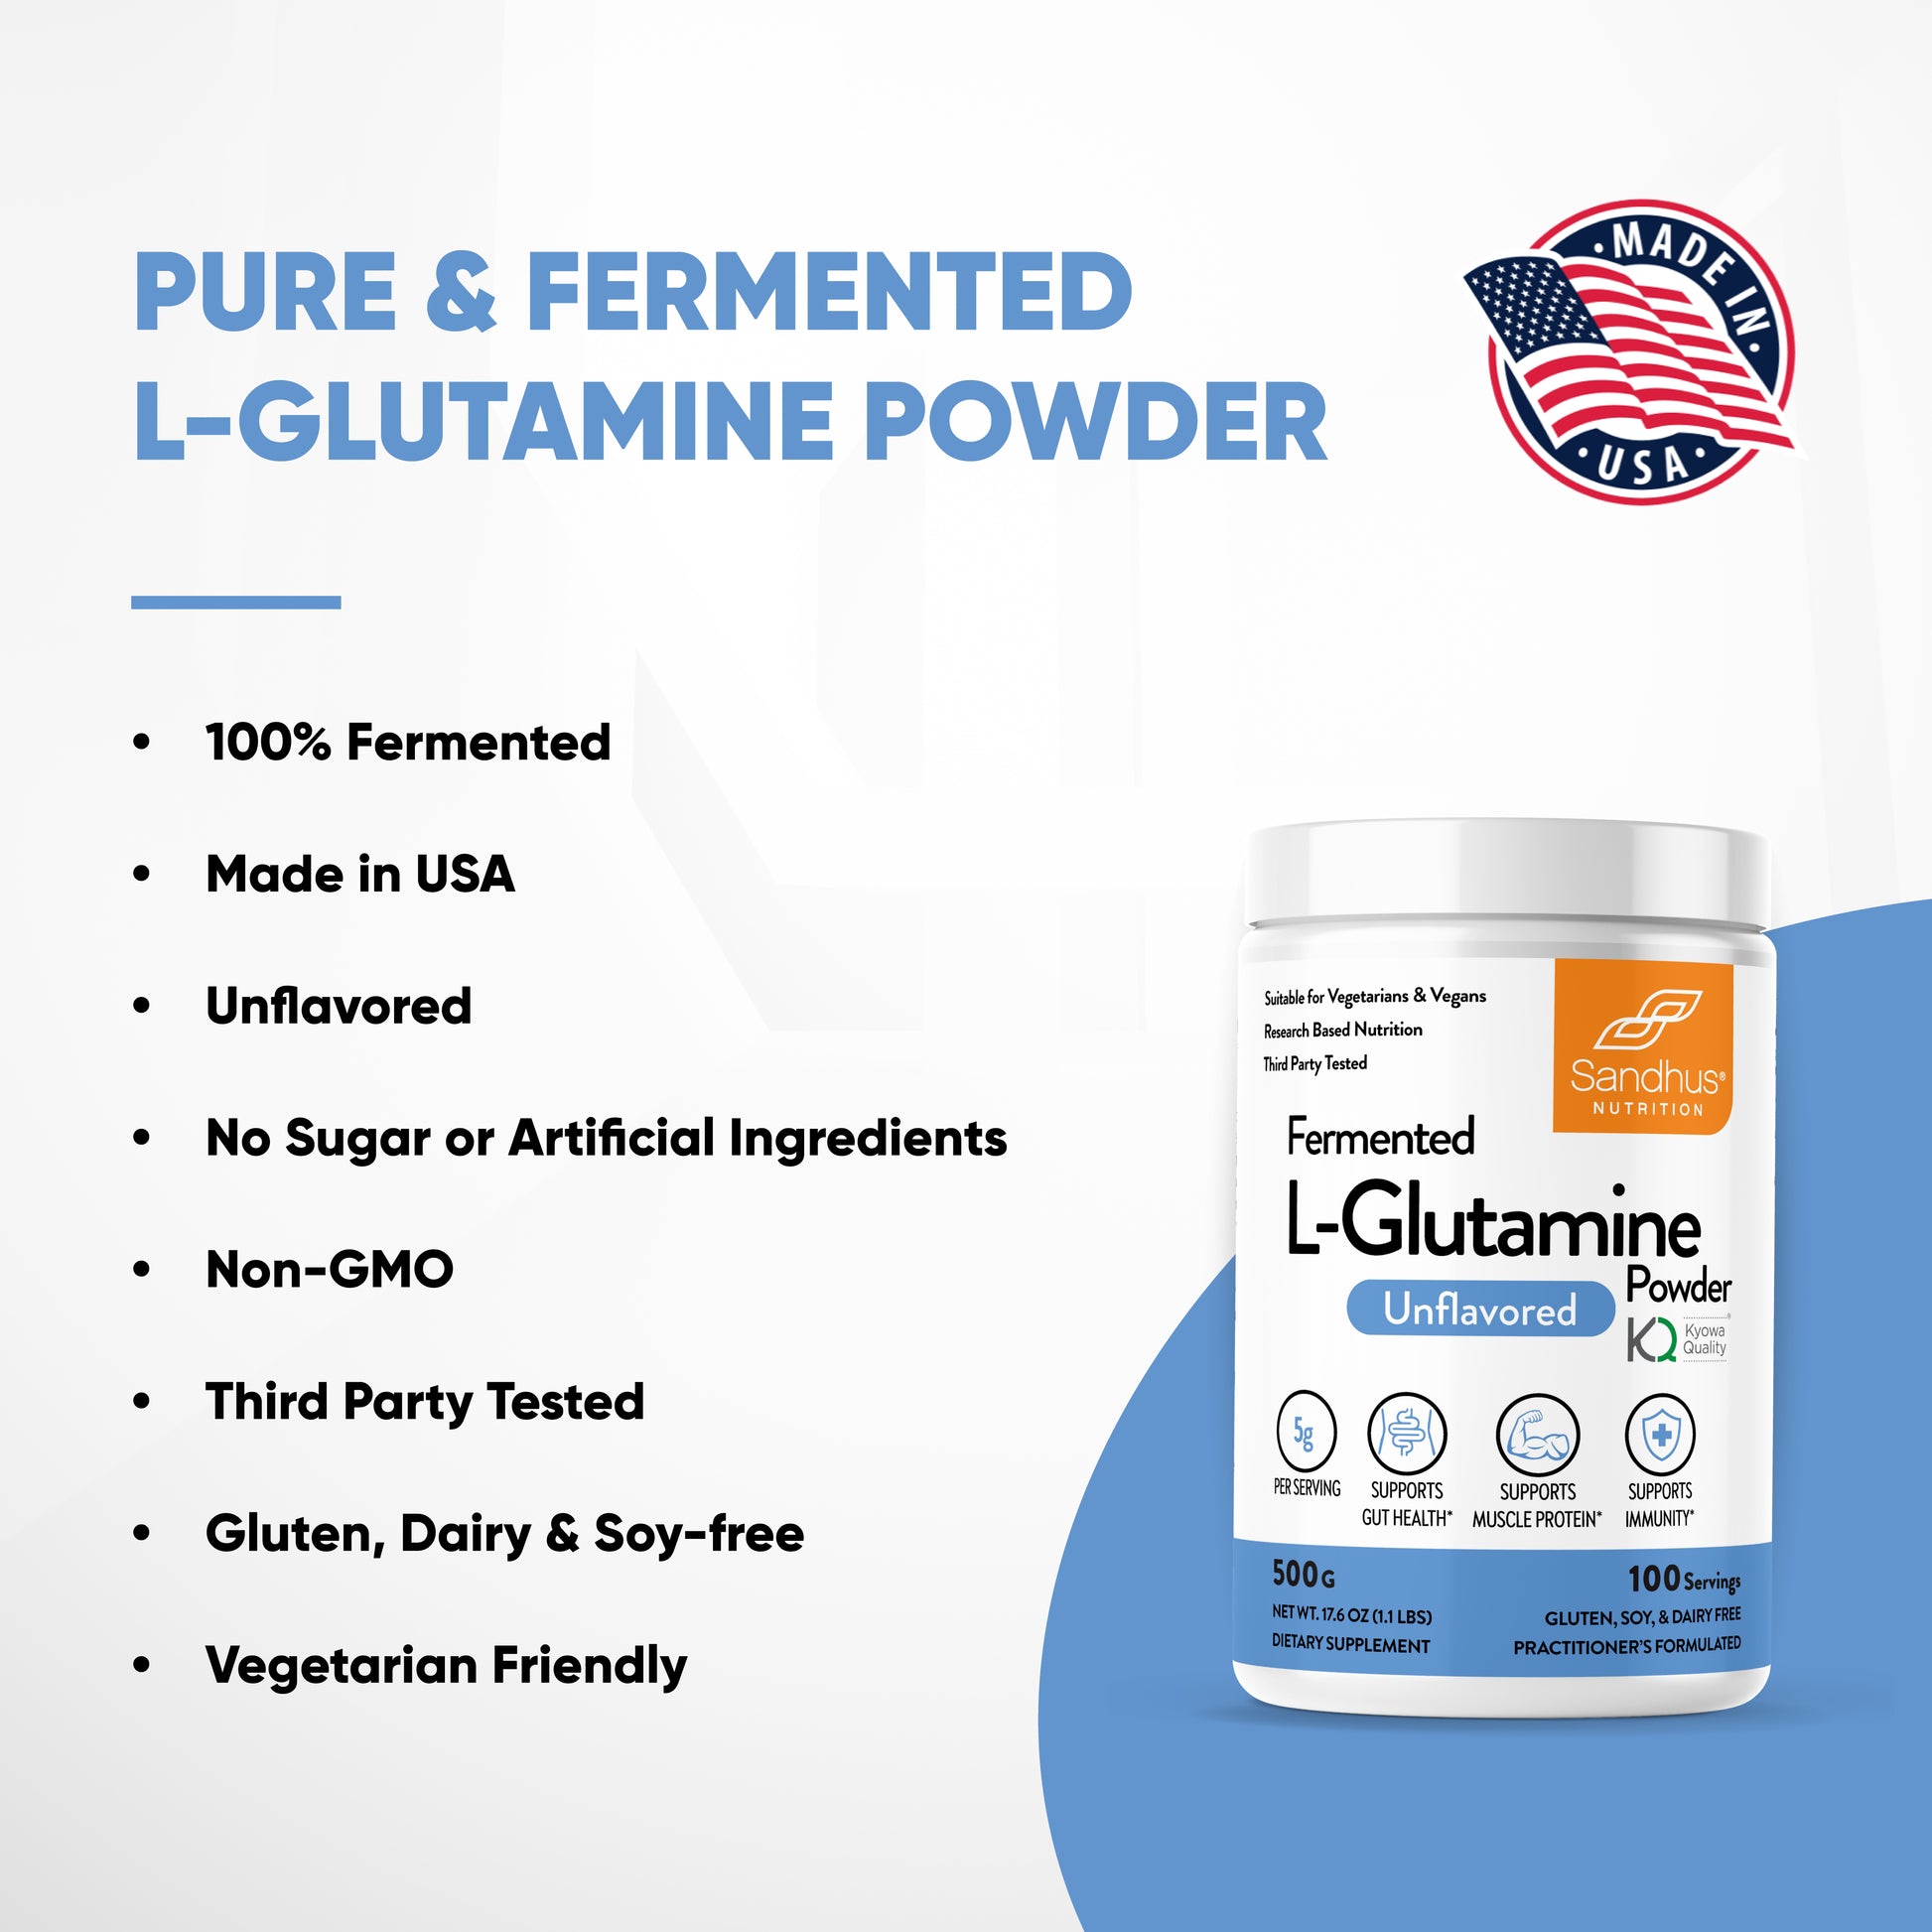 best l glutamine	l glutamine powder	l glutamine weight loss	l-glutamine powder	best l glutamine for gut health	